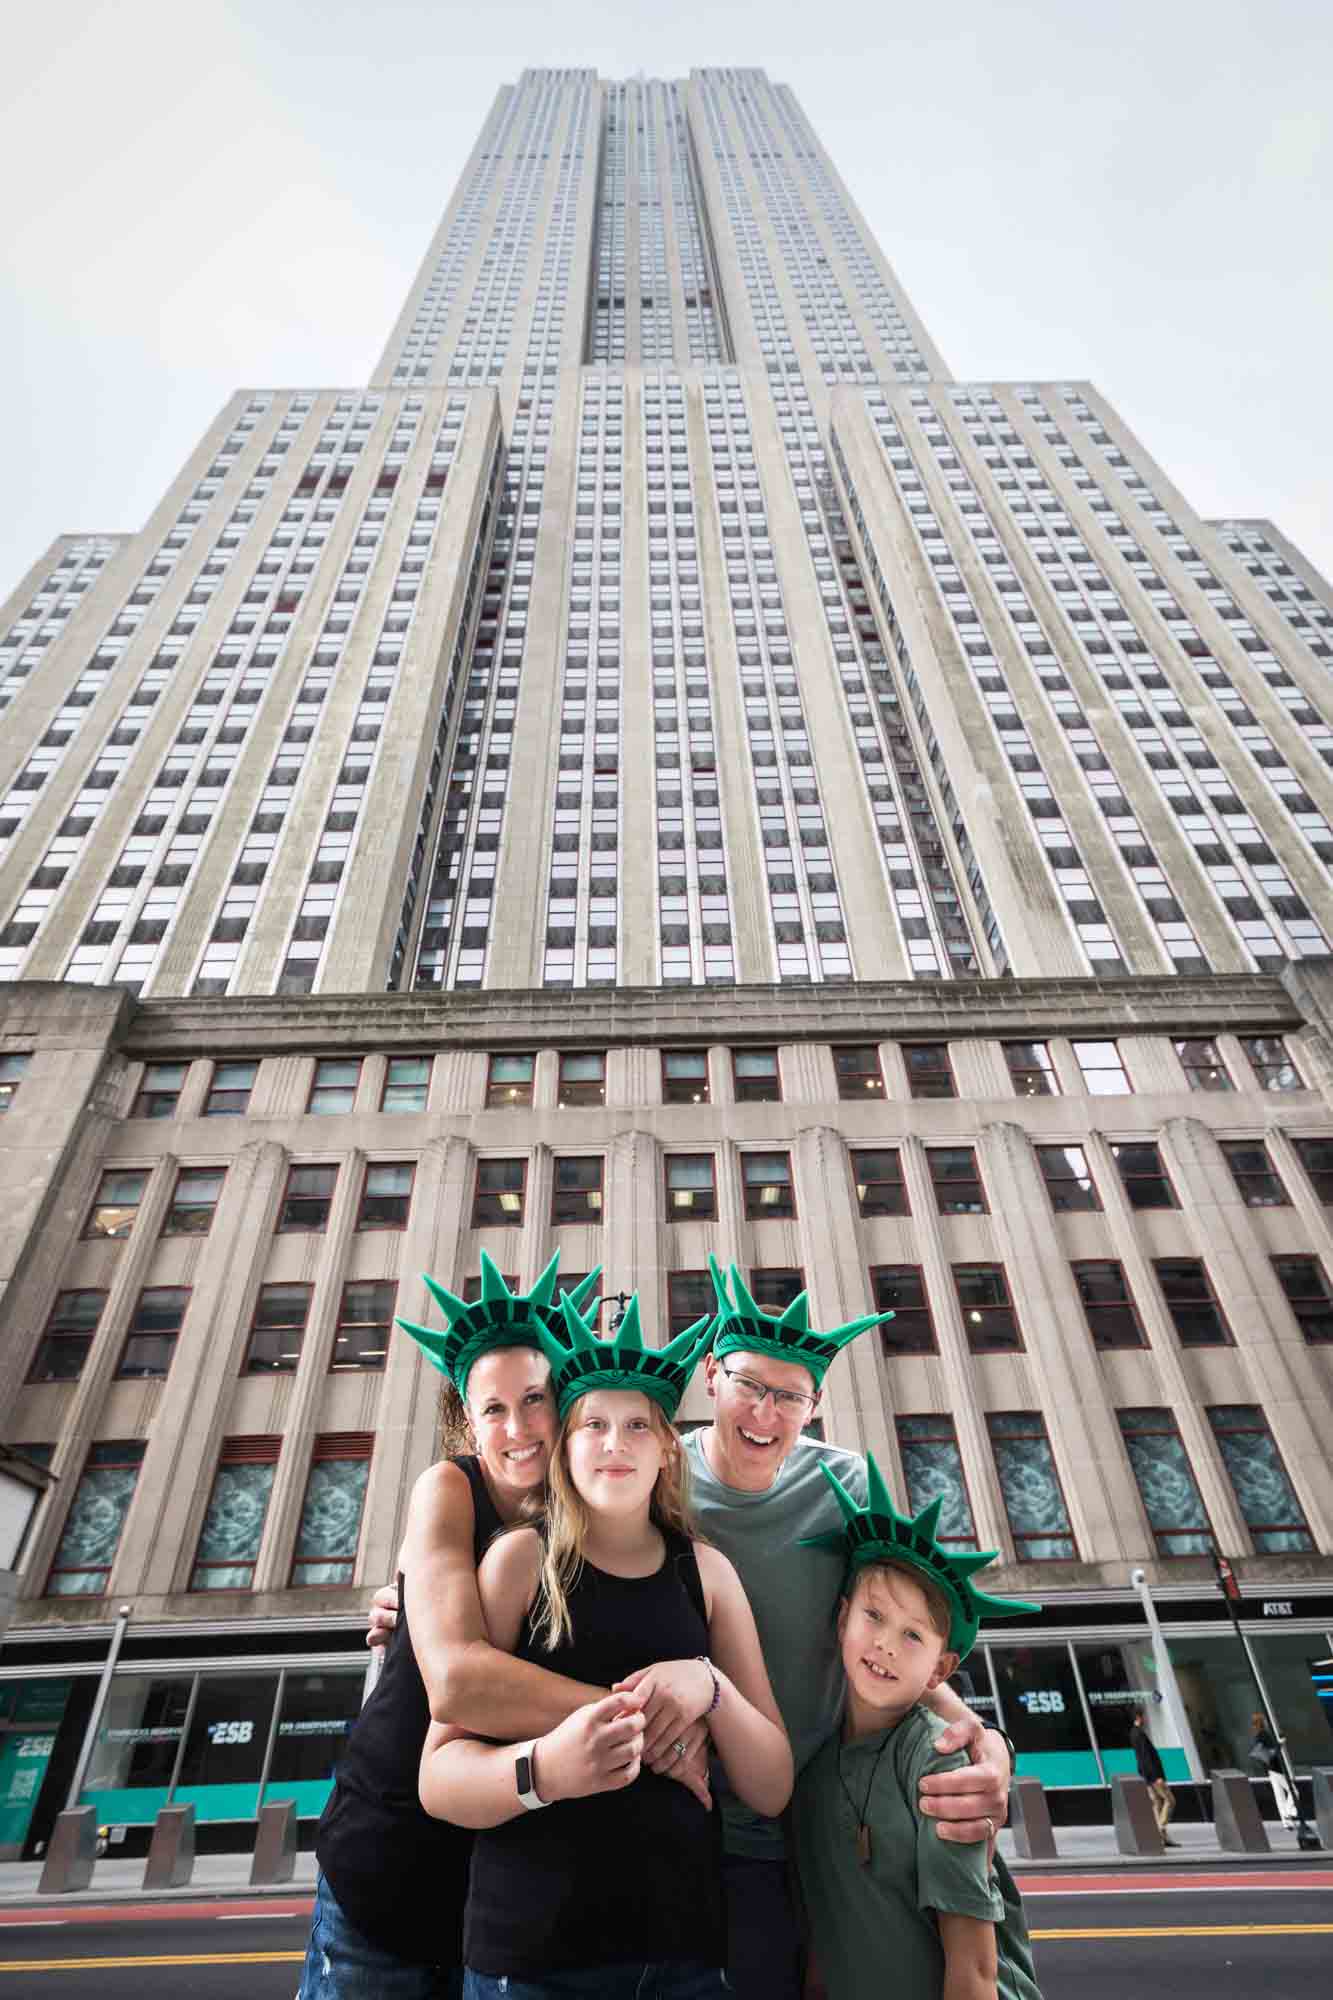 Parents and two kids with Statue of LIberty foam hats on standing in front of Empire State Building